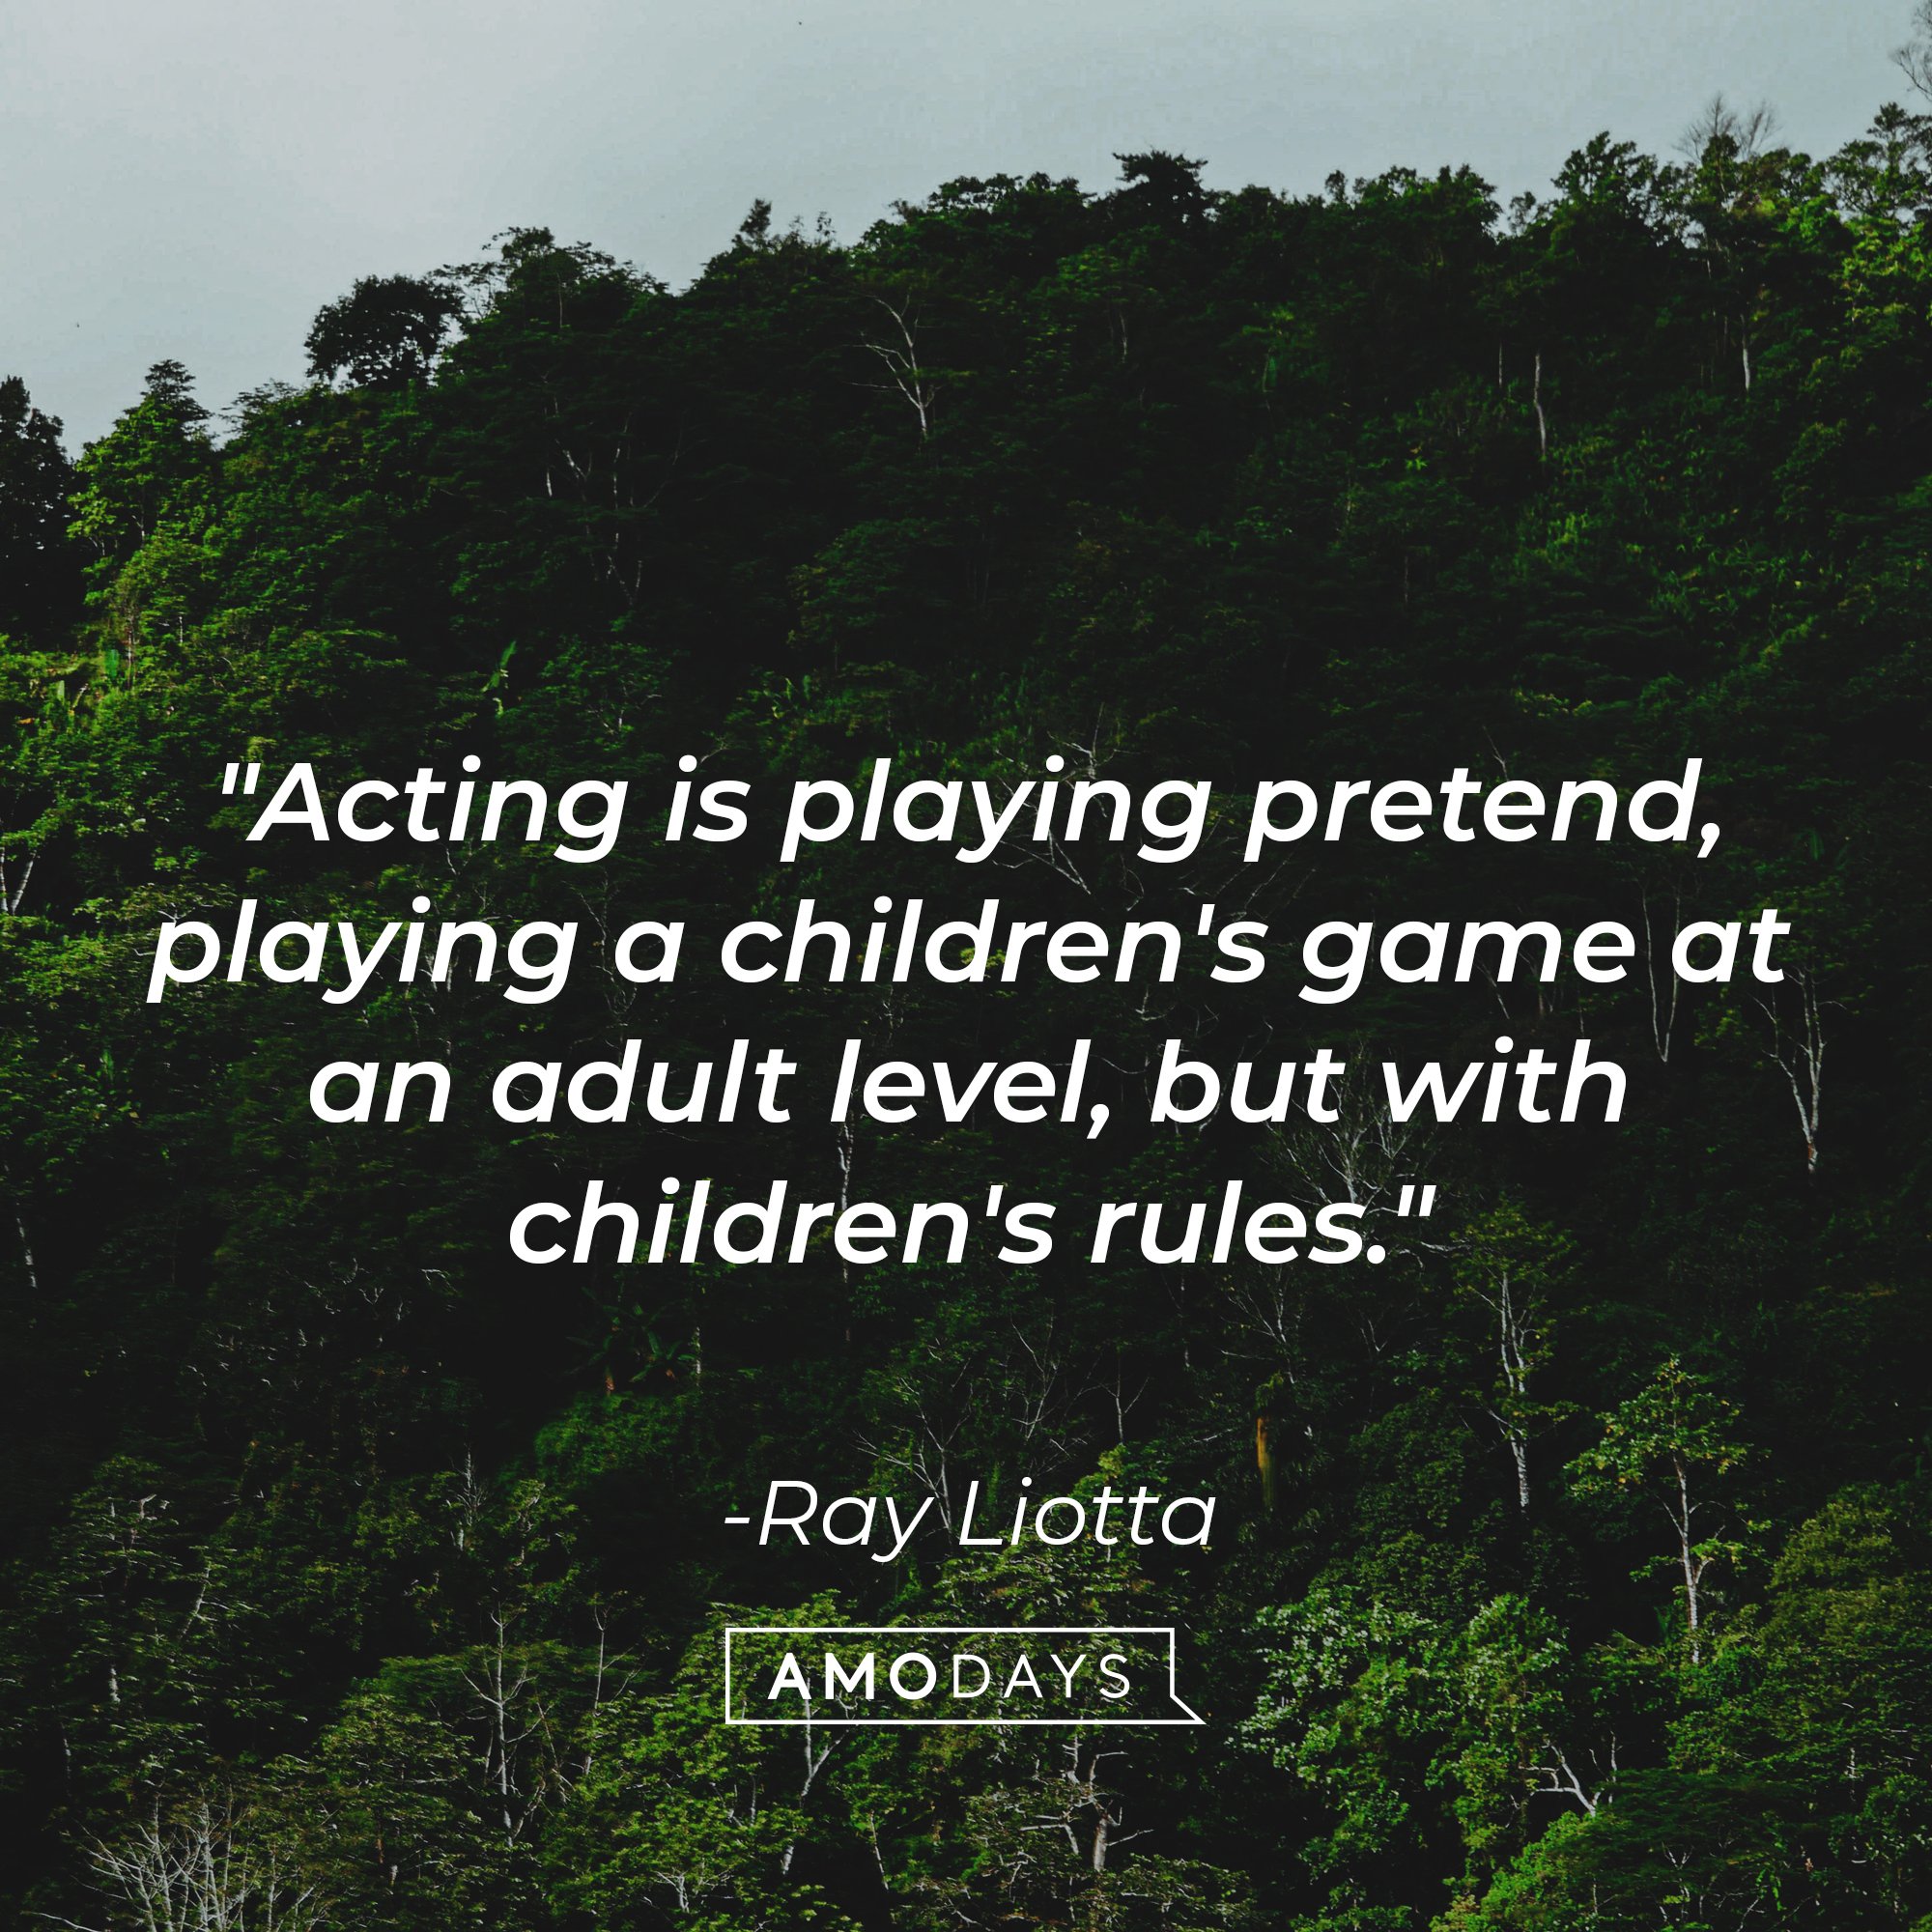 Ray Liotta’s quote: "Acting is playing pretend, playing a children's game at an adult level, but with children's rules." | Image: AmoDays